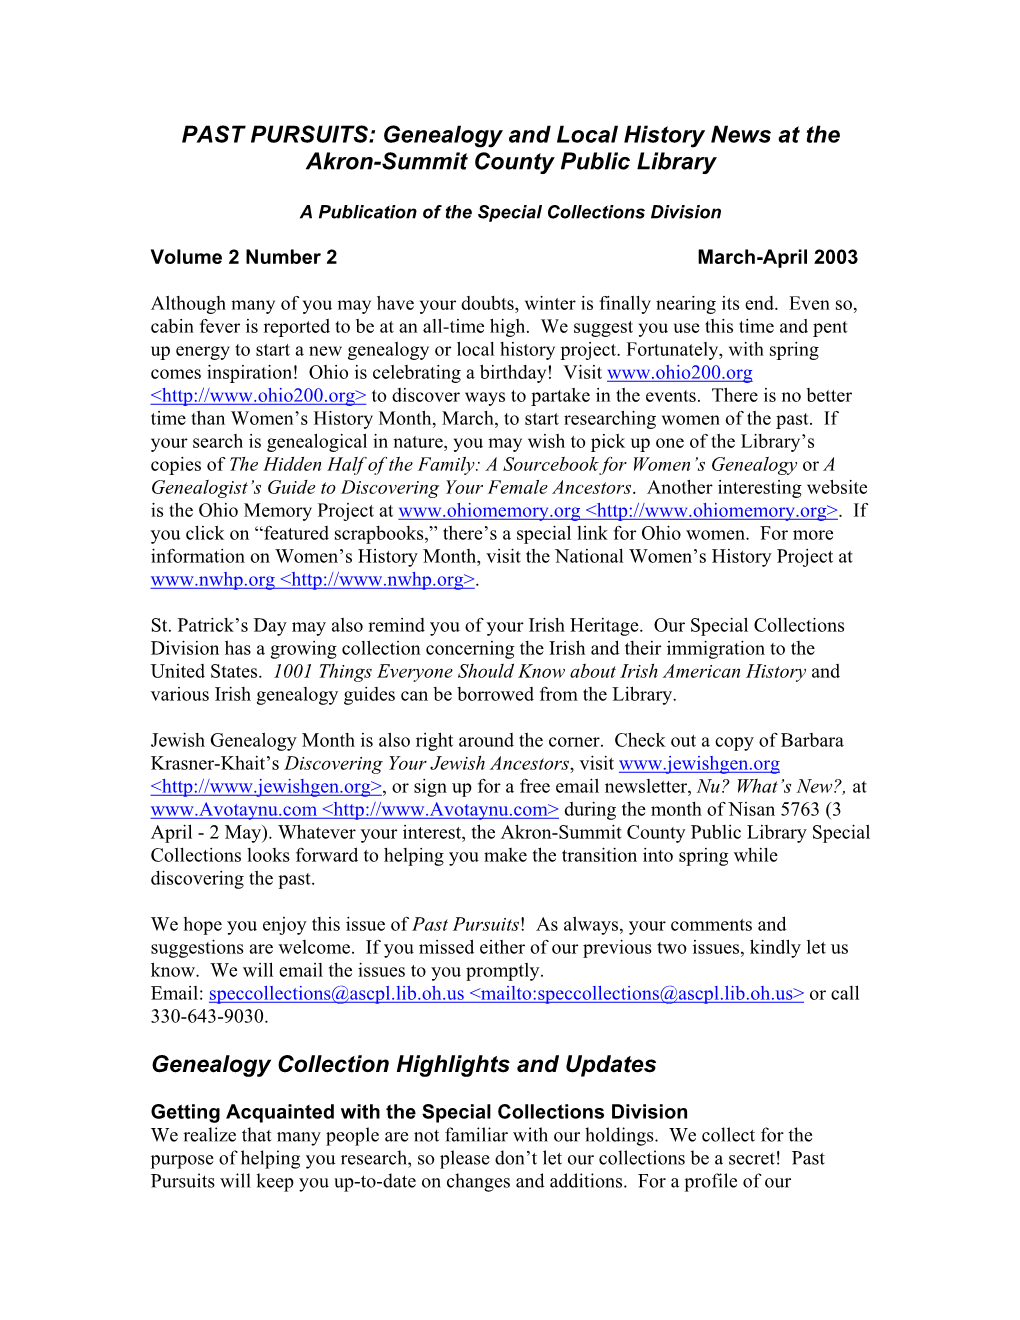 PAST PURSUITS: Genealogy and Local History News at the Akron-Summit County Public Library